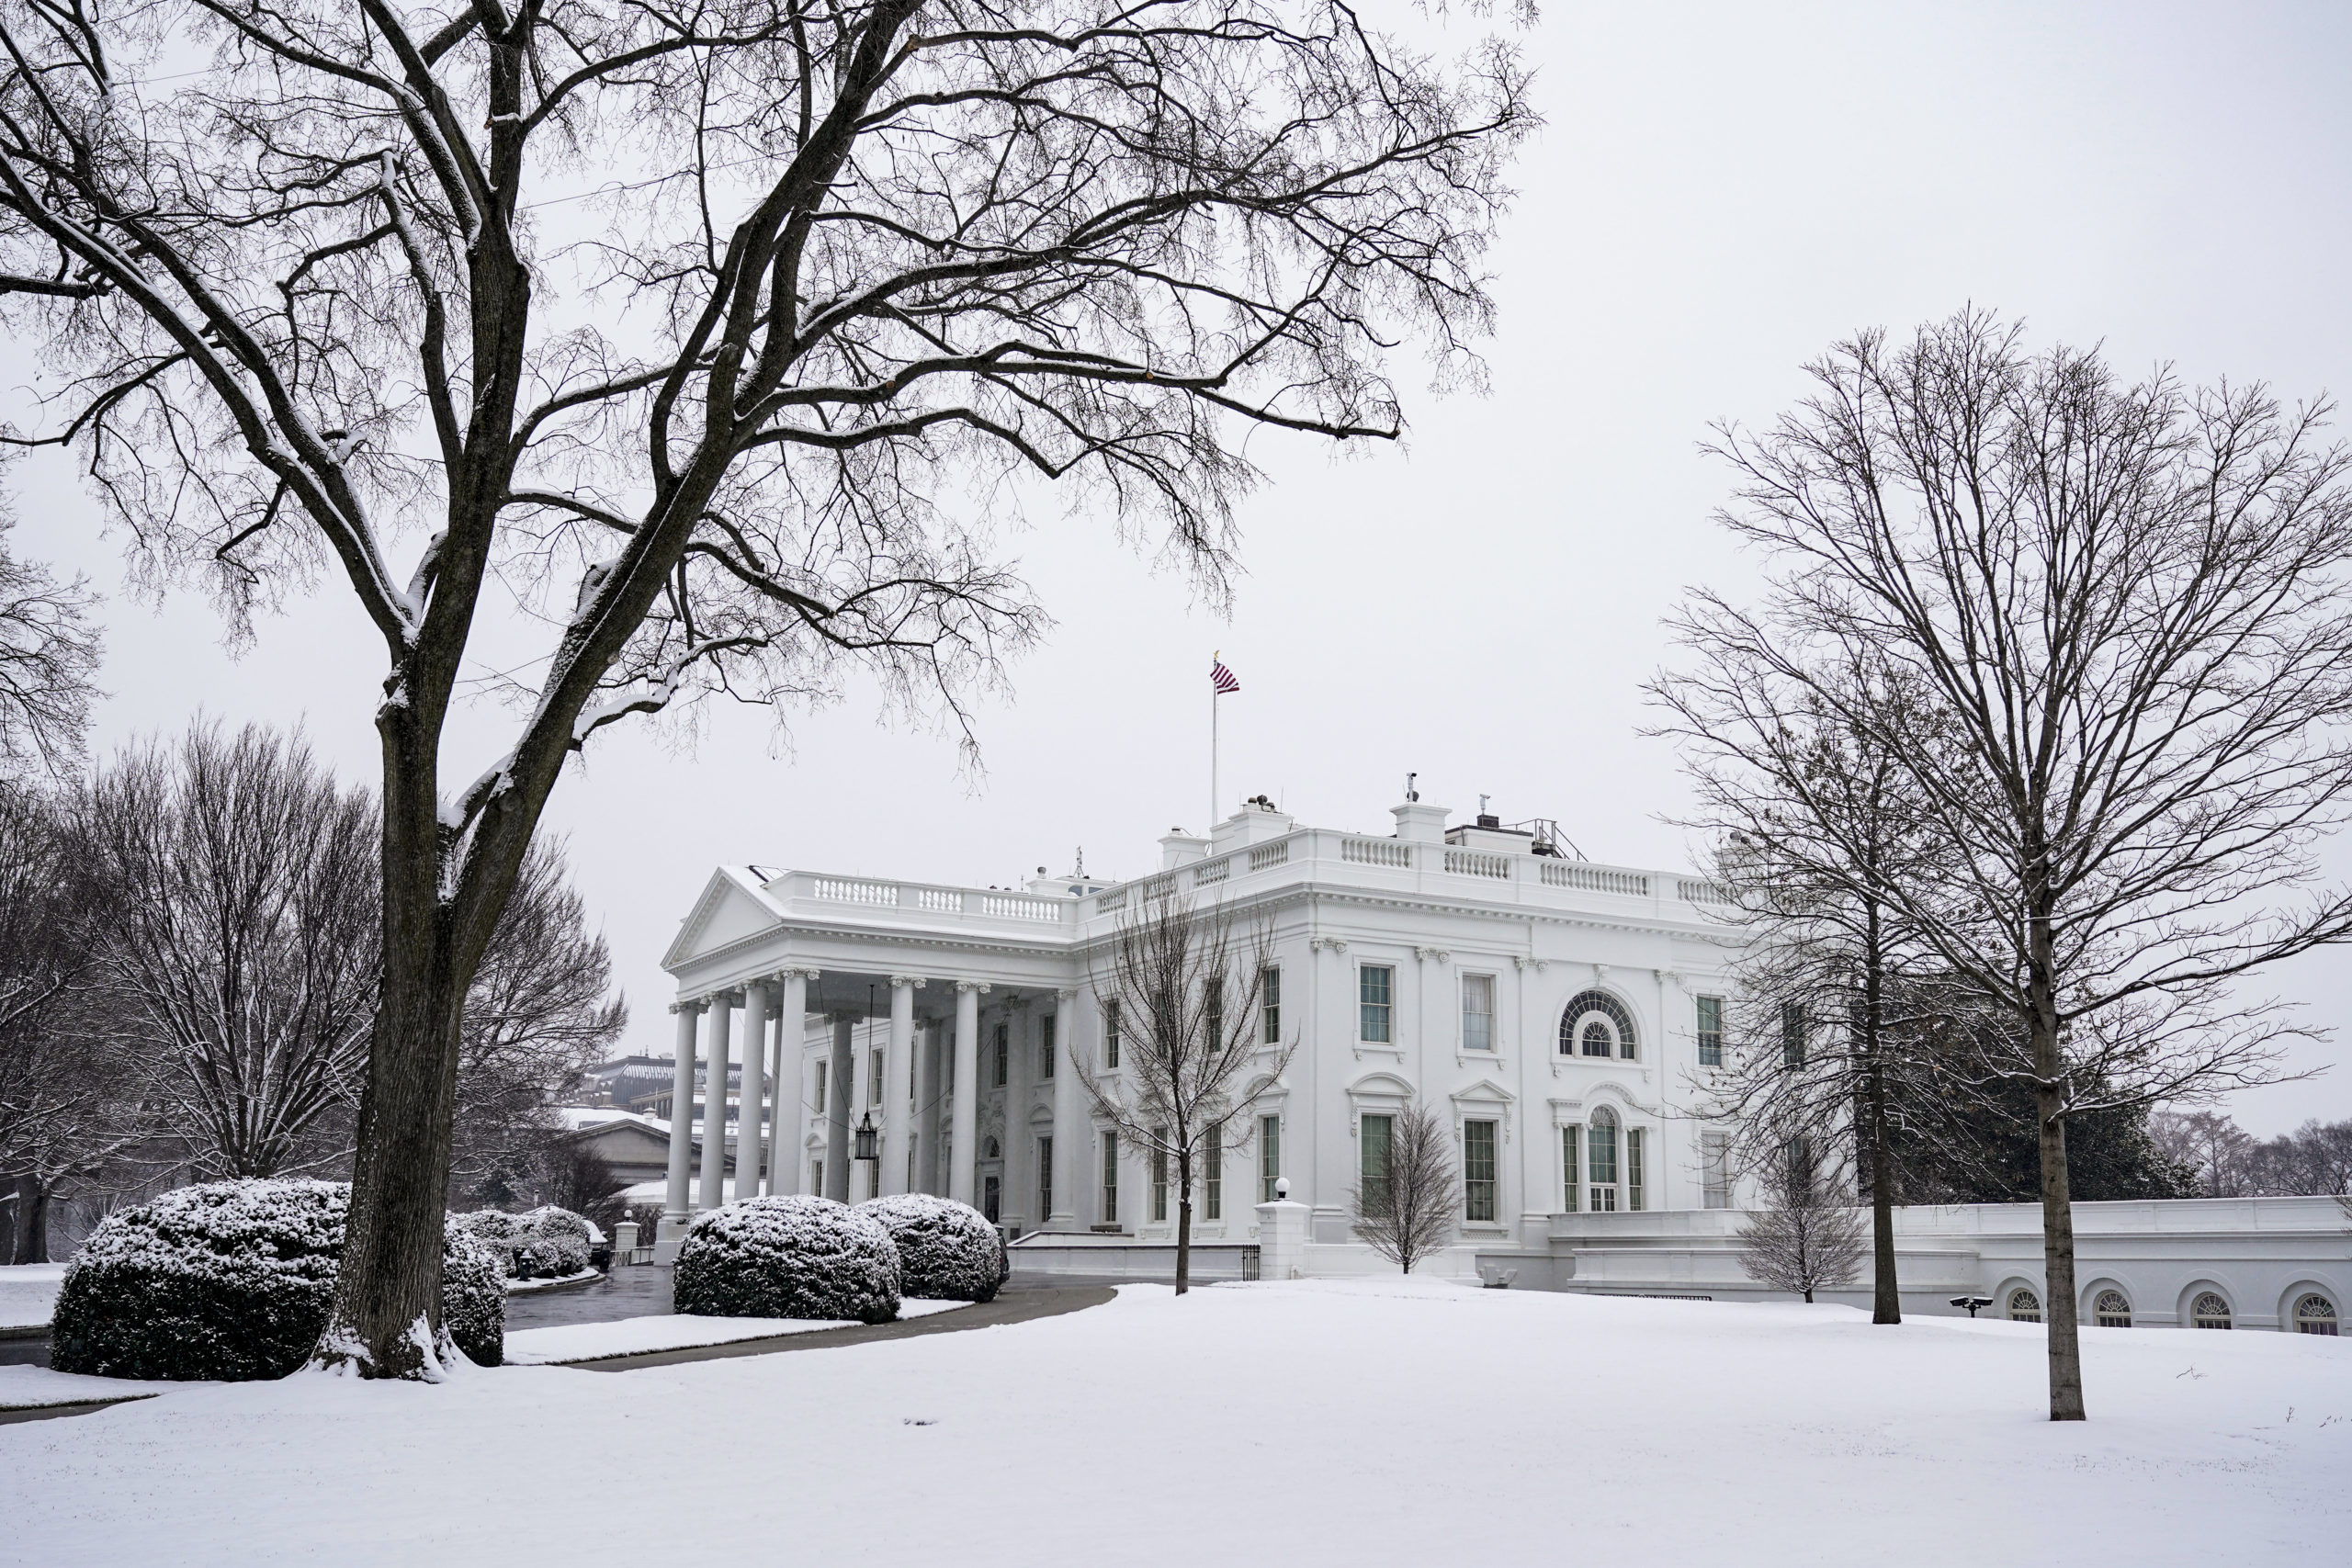 WASHINGTON, DC - JANUARY 31: The White House ground are covered in snow during a snow storm on January 31, 2021 in Washington, DC. Washington is expecting 3 to 5 inches of snow during the first major snow storm of the year. (Photo by Joshua Roberts/Getty Images)